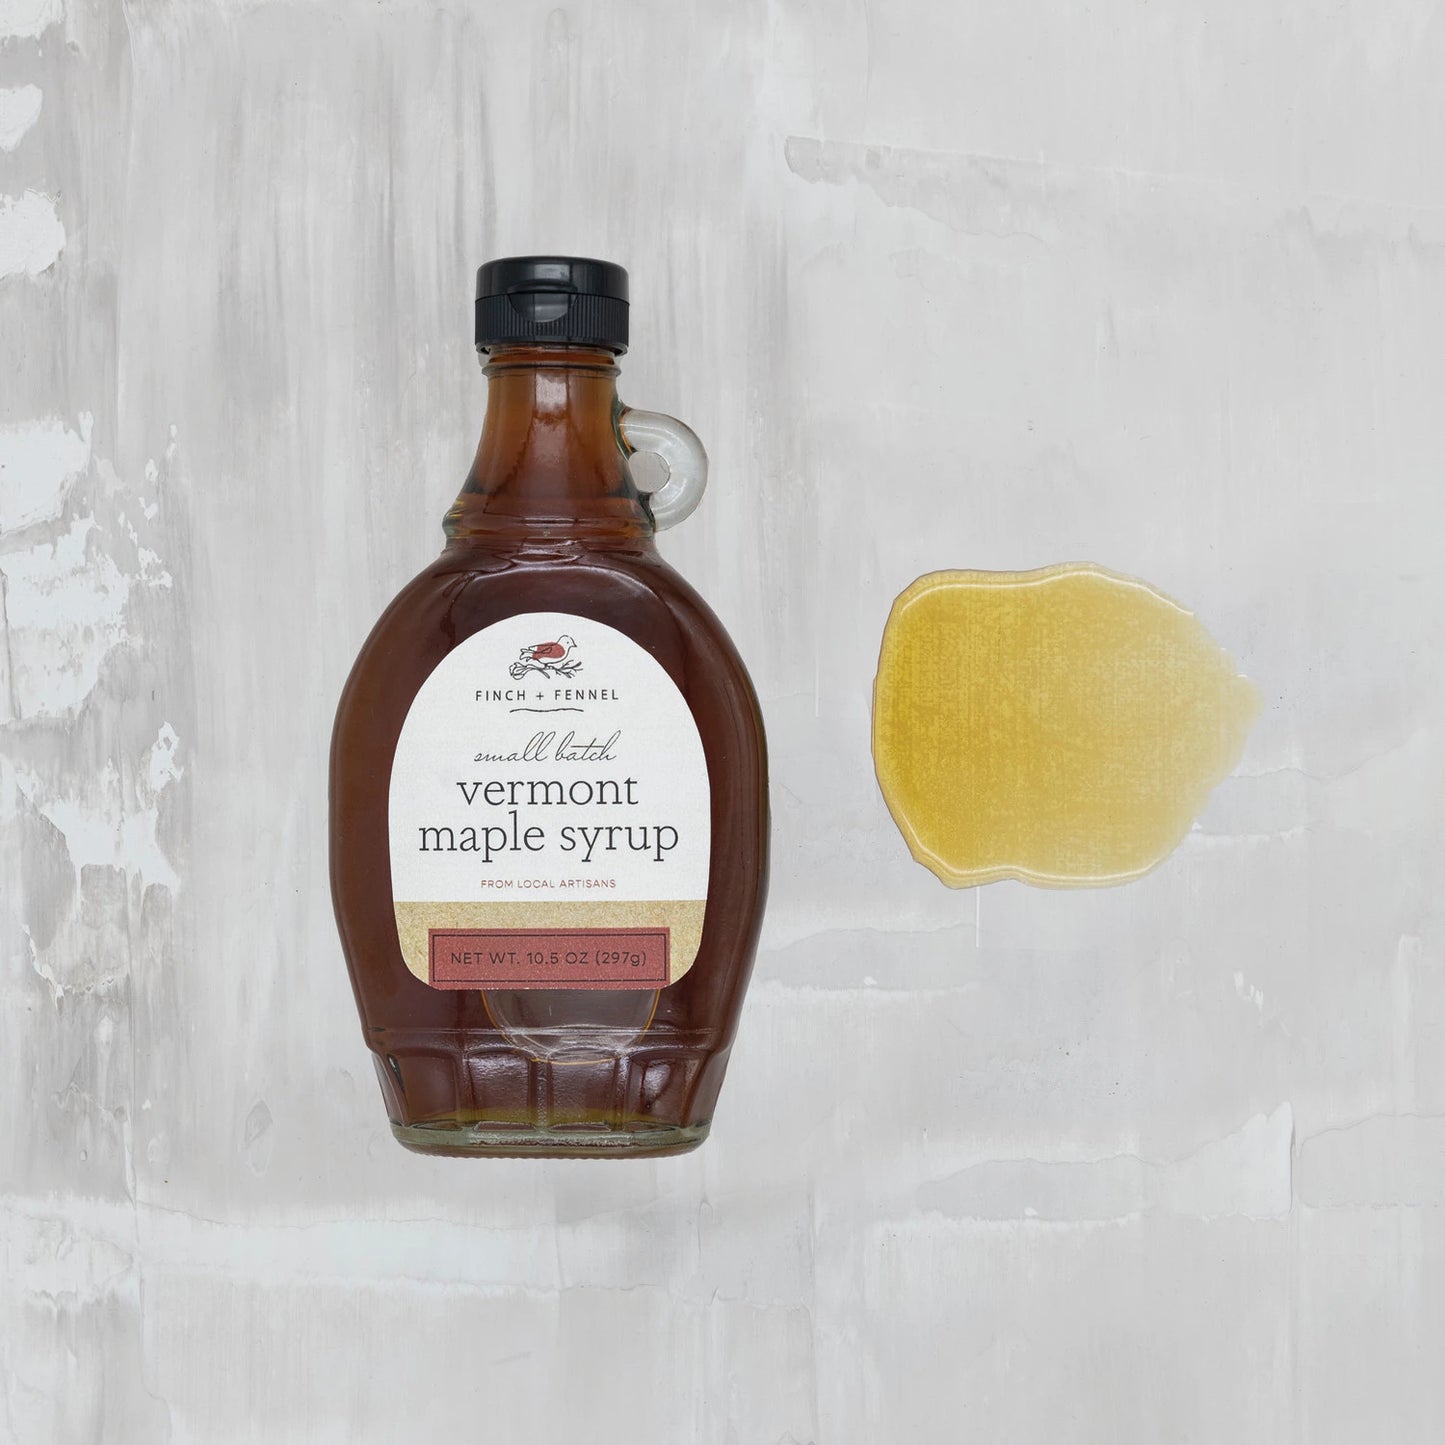 Finch + Fennel Small Batch Vermont Maple Syrup